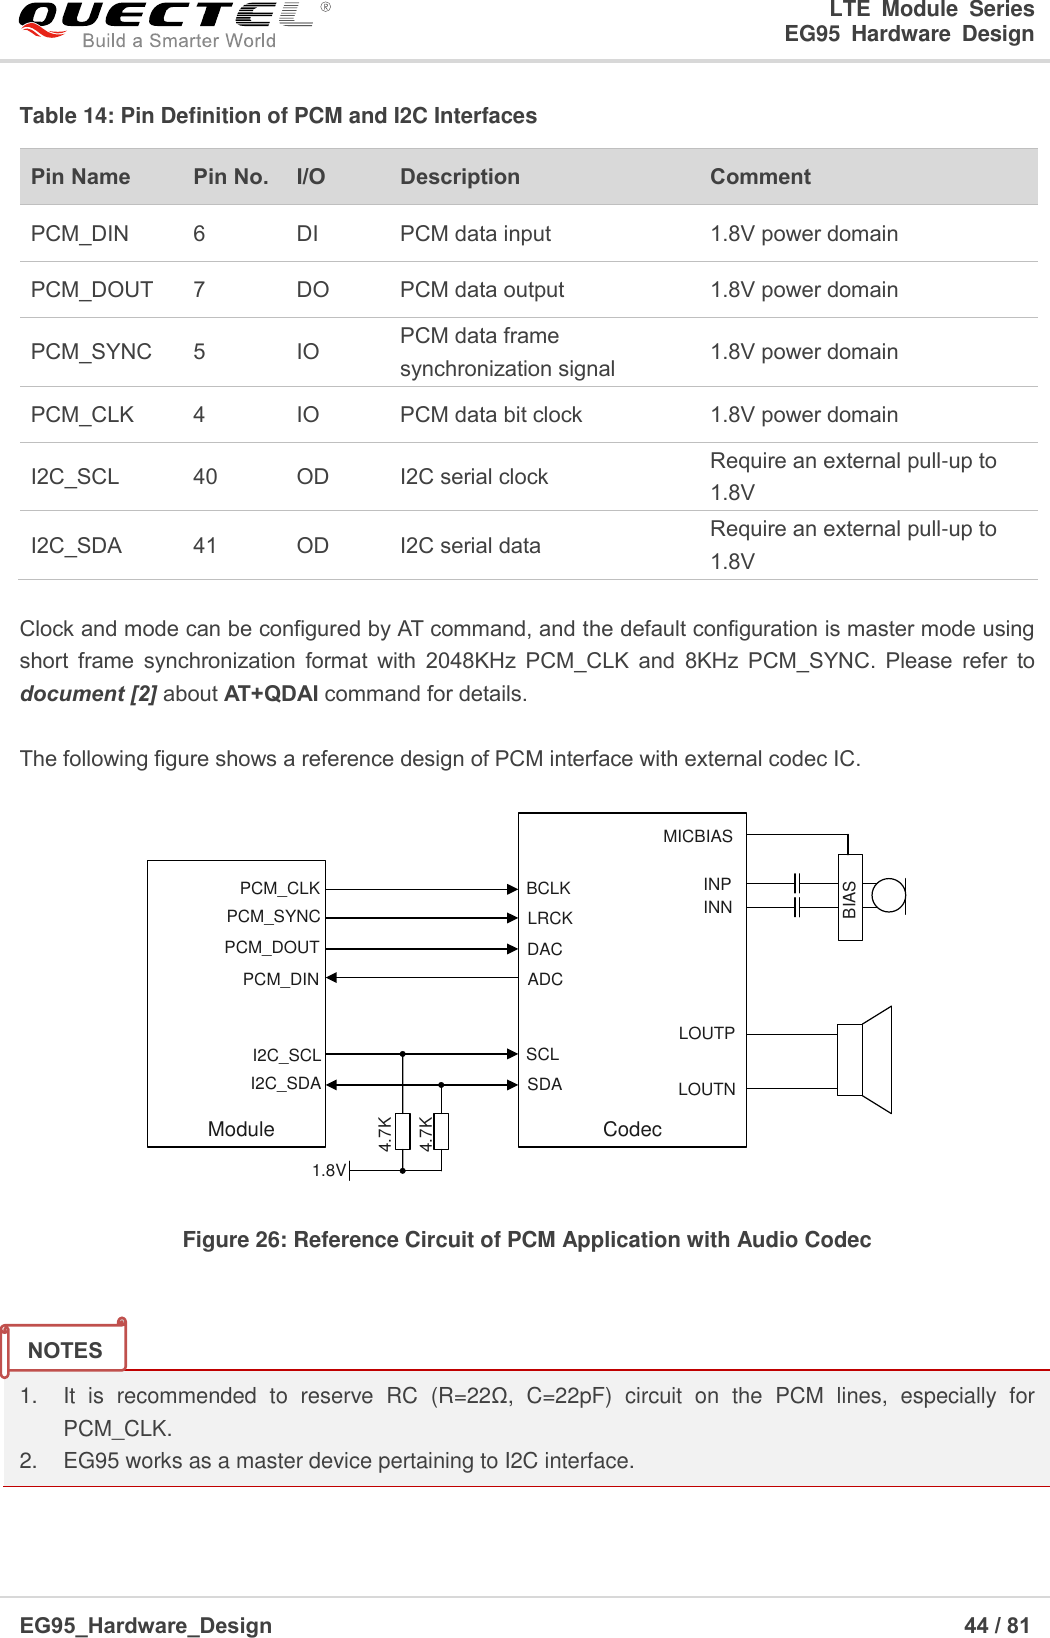 LTE  Module  Series                                                  EG95  Hardware  Design  EG95_Hardware_Design                                                                   44 / 81    Table 14: Pin Definition of PCM and I2C Interfaces Pin Name   Pin No. I/O Description   Comment PCM_DIN 6 DI PCM data input 1.8V power domain PCM_DOUT 7 DO PCM data output 1.8V power domain PCM_SYNC 5 IO PCM data frame synchronization signal 1.8V power domain PCM_CLK 4 IO PCM data bit clock 1.8V power domain I2C_SCL 40 OD I2C serial clock Require an external pull-up to 1.8V I2C_SDA 41 OD I2C serial data Require an external pull-up to 1.8V  Clock and mode can be configured by AT command, and the default configuration is master mode using short  frame  synchronization  format  with  2048KHz  PCM_CLK  and  8KHz  PCM_SYNC.  Please  refer  to document [2] about AT+QDAI command for details.  The following figure shows a reference design of PCM interface with external codec IC. PCM_DINPCM_DOUTPCM_SYNCPCM_CLKI2C_SCLI2C_SDAModule1.8V4.7K4.7KBCLKLRCKDACADCSCLSDABIASMICBIASINPINNLOUTPLOUTNCodec Figure 26: Reference Circuit of PCM Application with Audio Codec   1.    It  is  recommended  to  reserve  RC  (R=22Ω,  C=22pF)  circuit  on  the  PCM  lines,  especially  for   PCM_CLK. 2.    EG95 works as a master device pertaining to I2C interface.  NOTES 